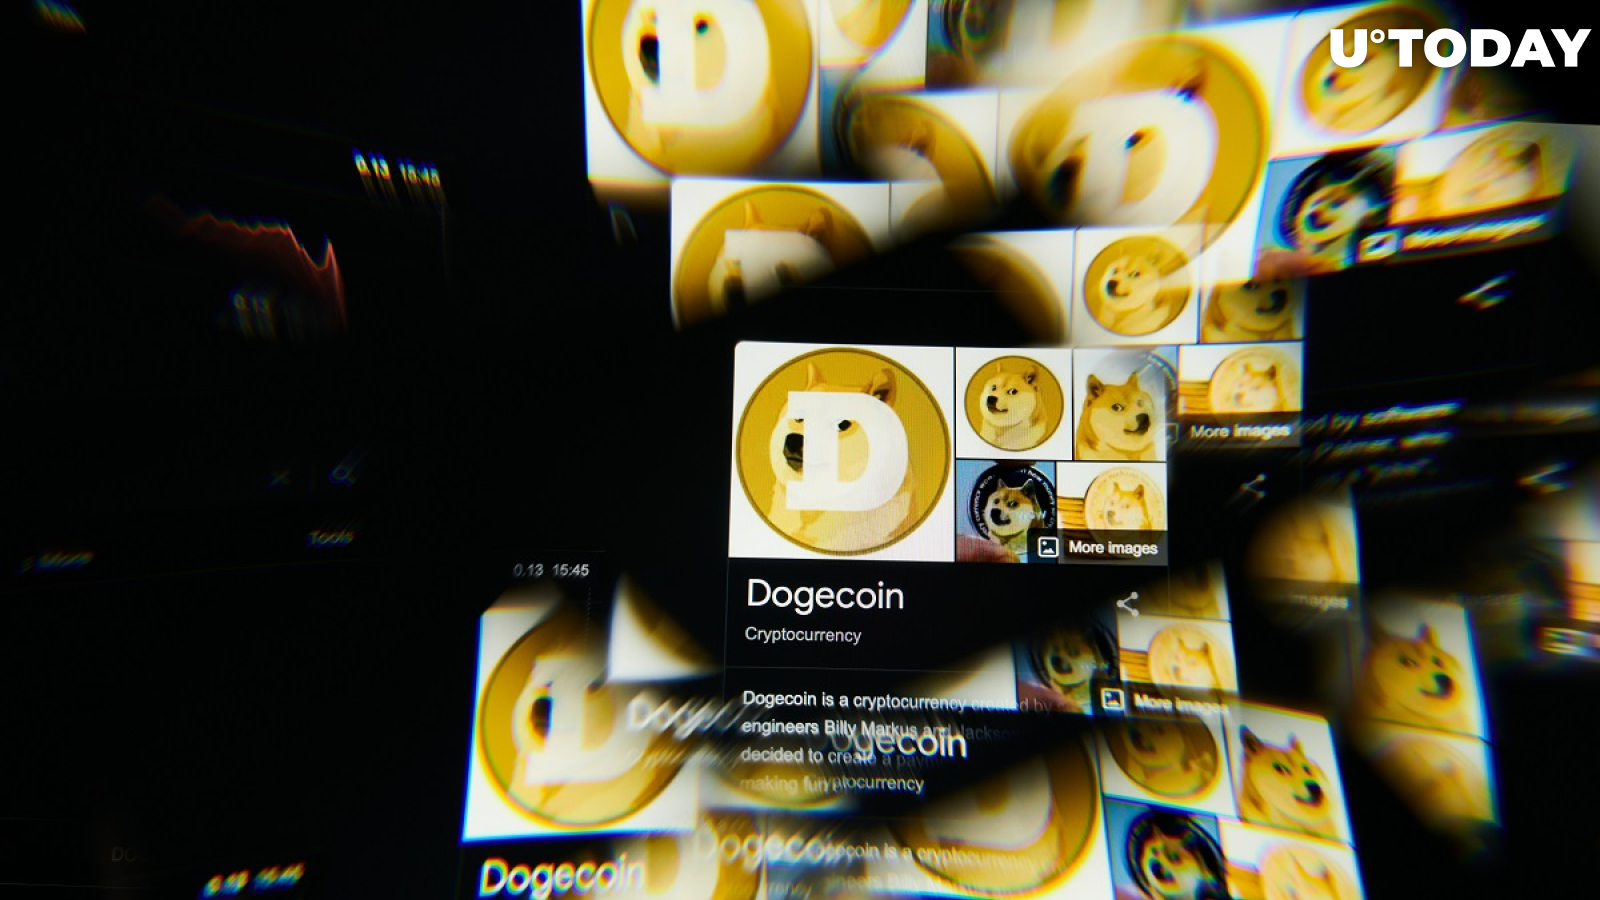 Dogecoin Co-Founder Urges Community Not to Focus on Price